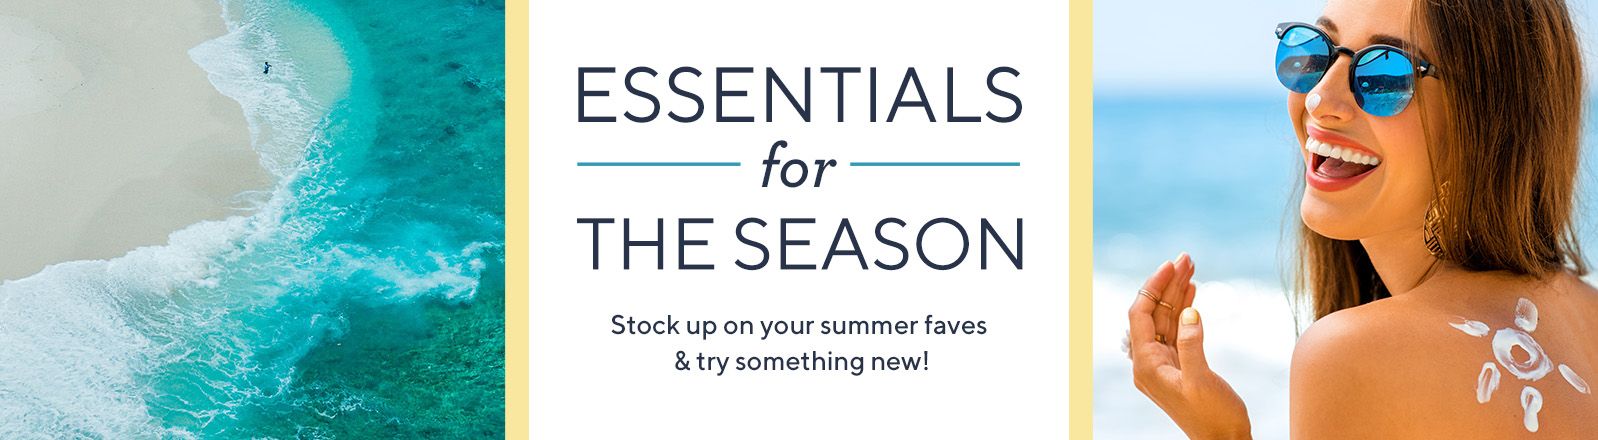 Essentials for the Season  Stock up on your summer faves & try something new!